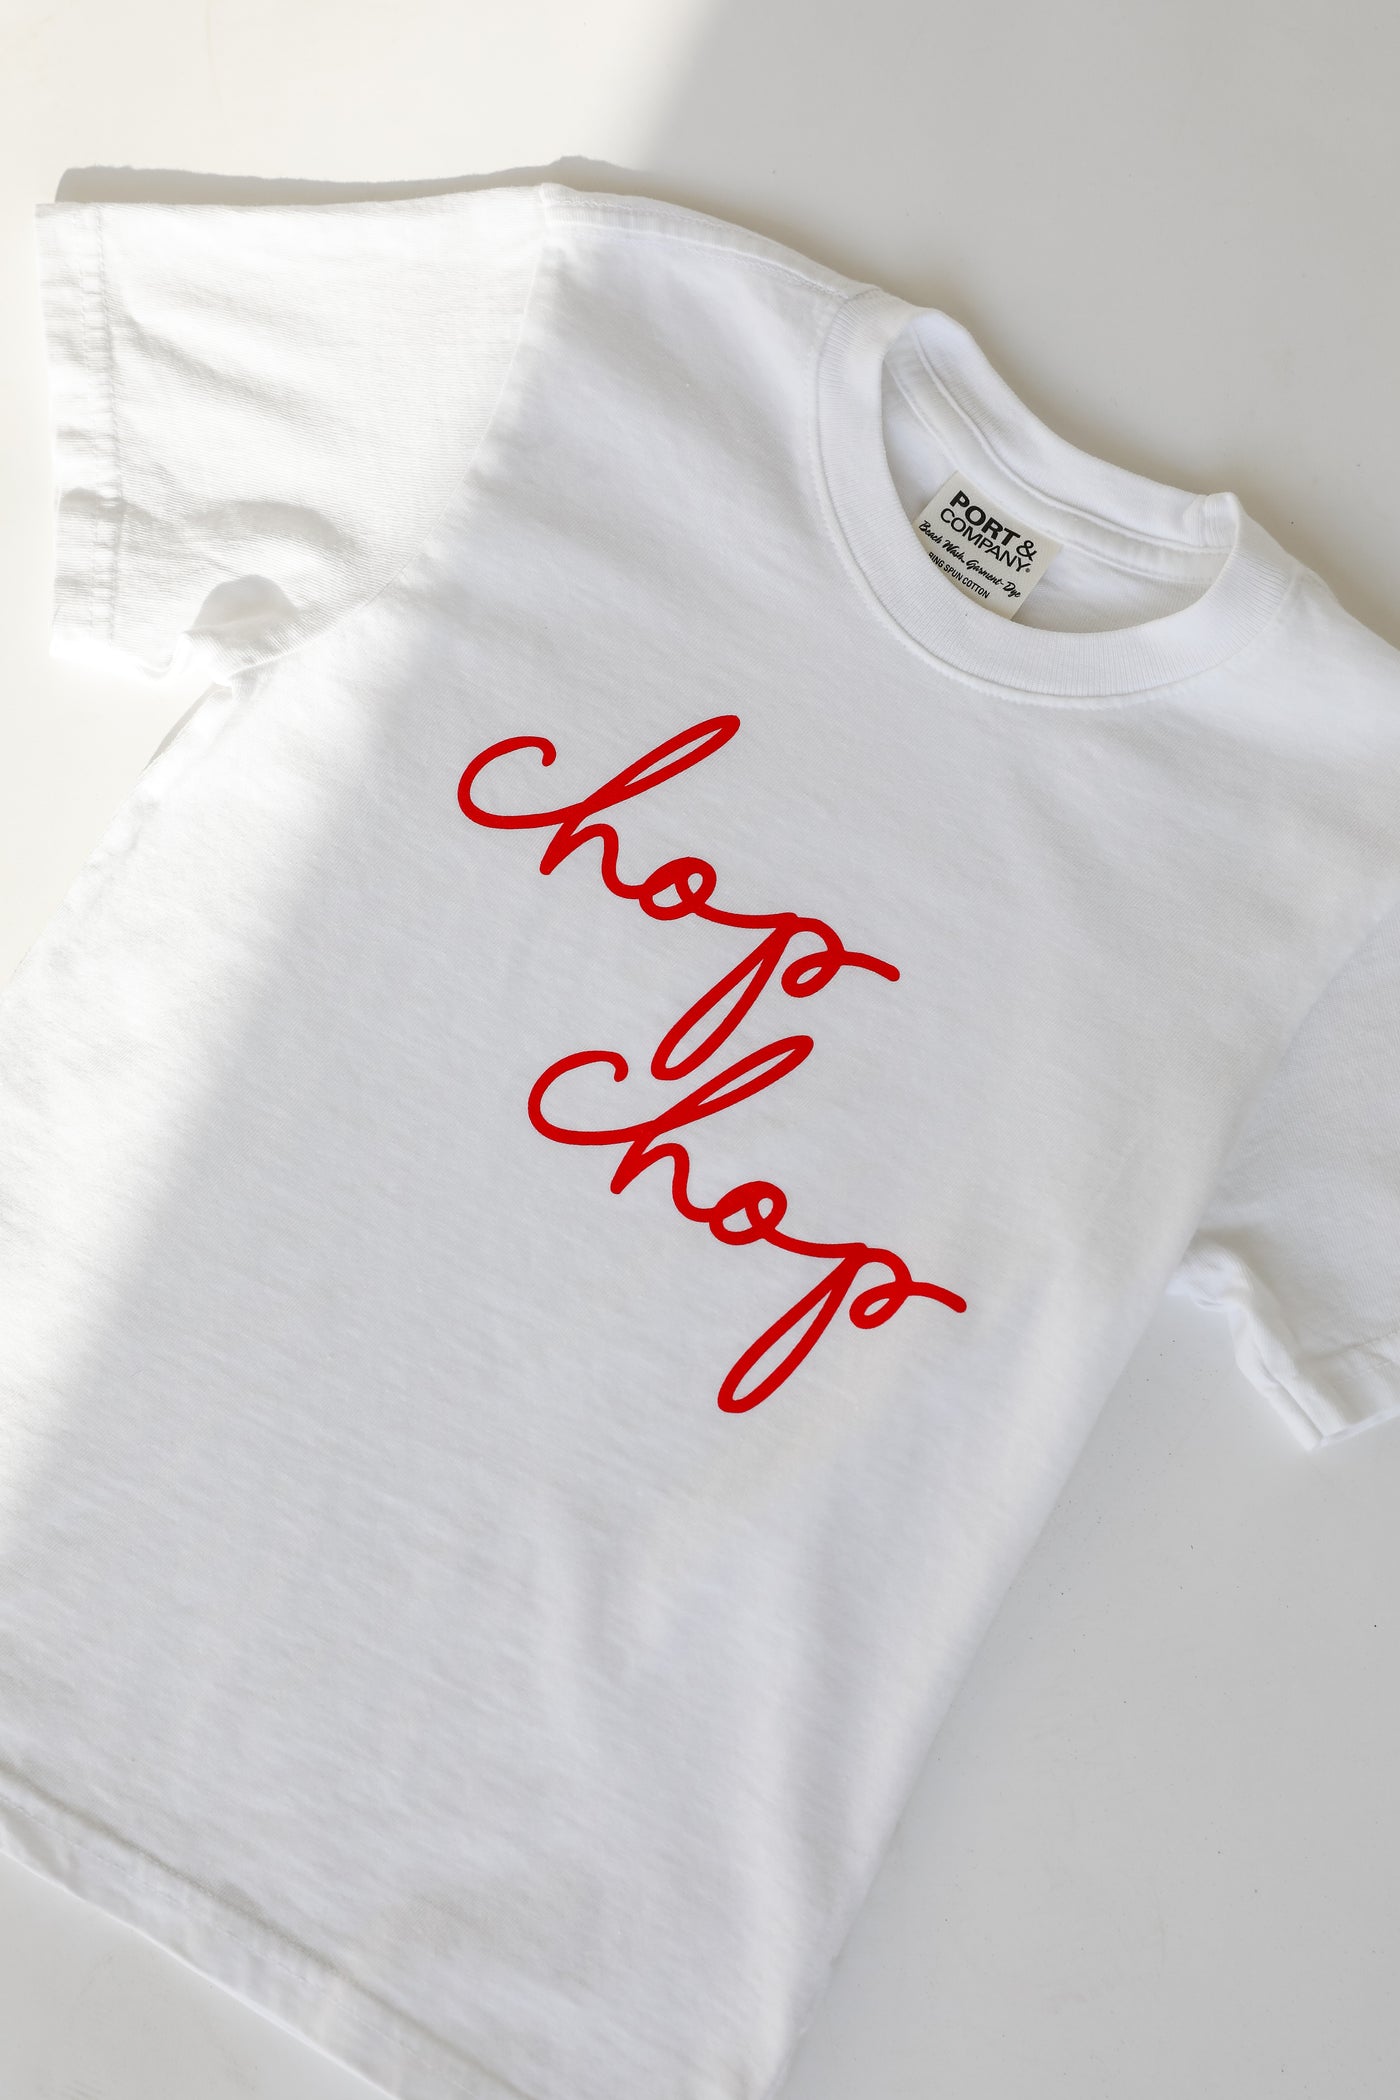 Youth White Chop Chop Script Tee from dress up